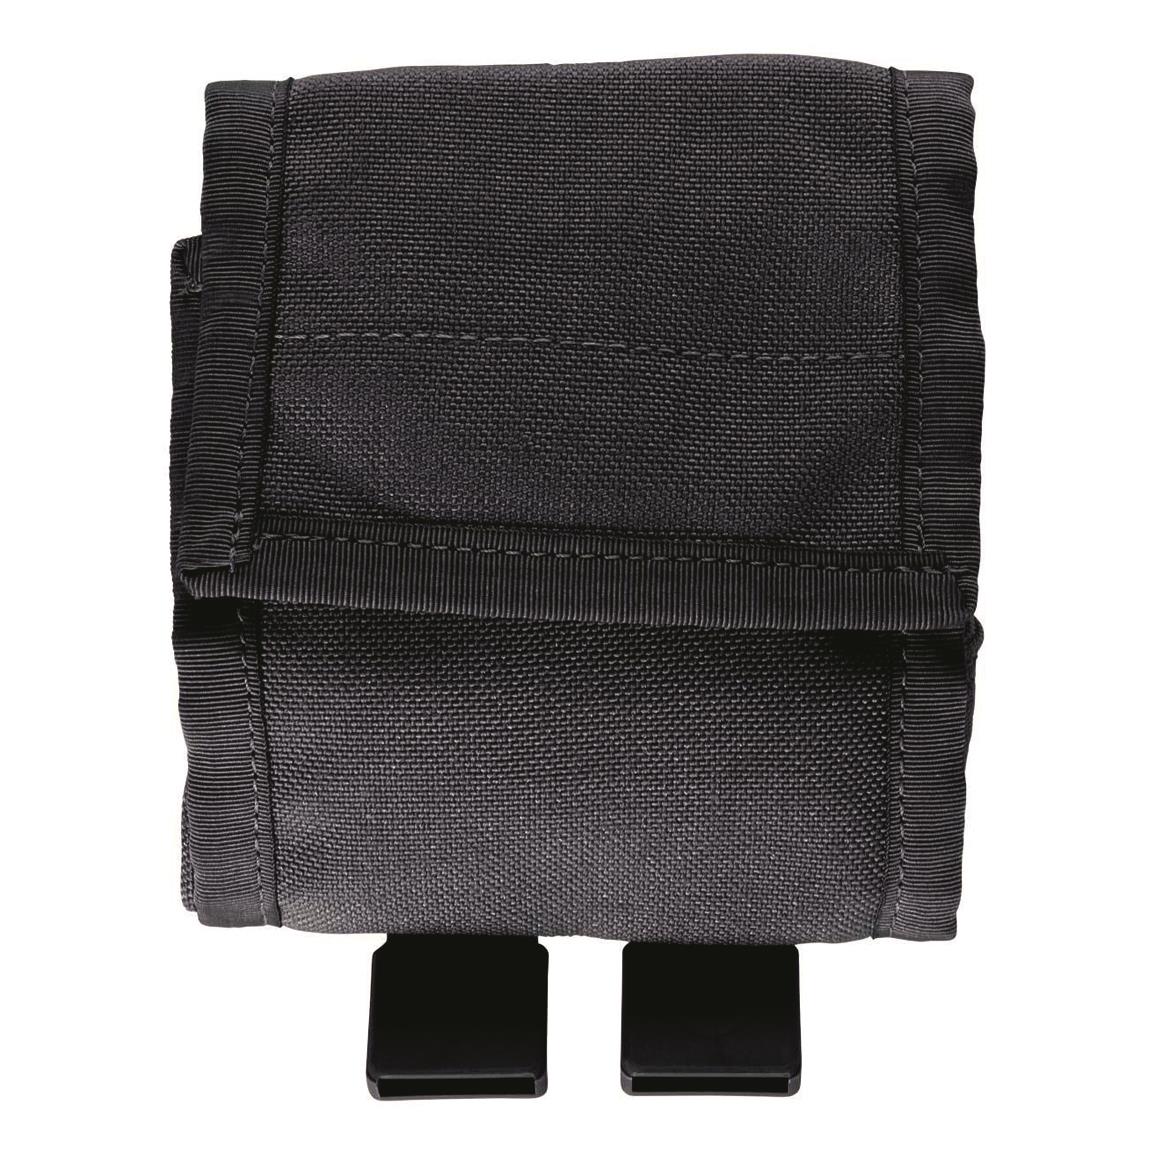 United States Tactical Dump Pouch, Black